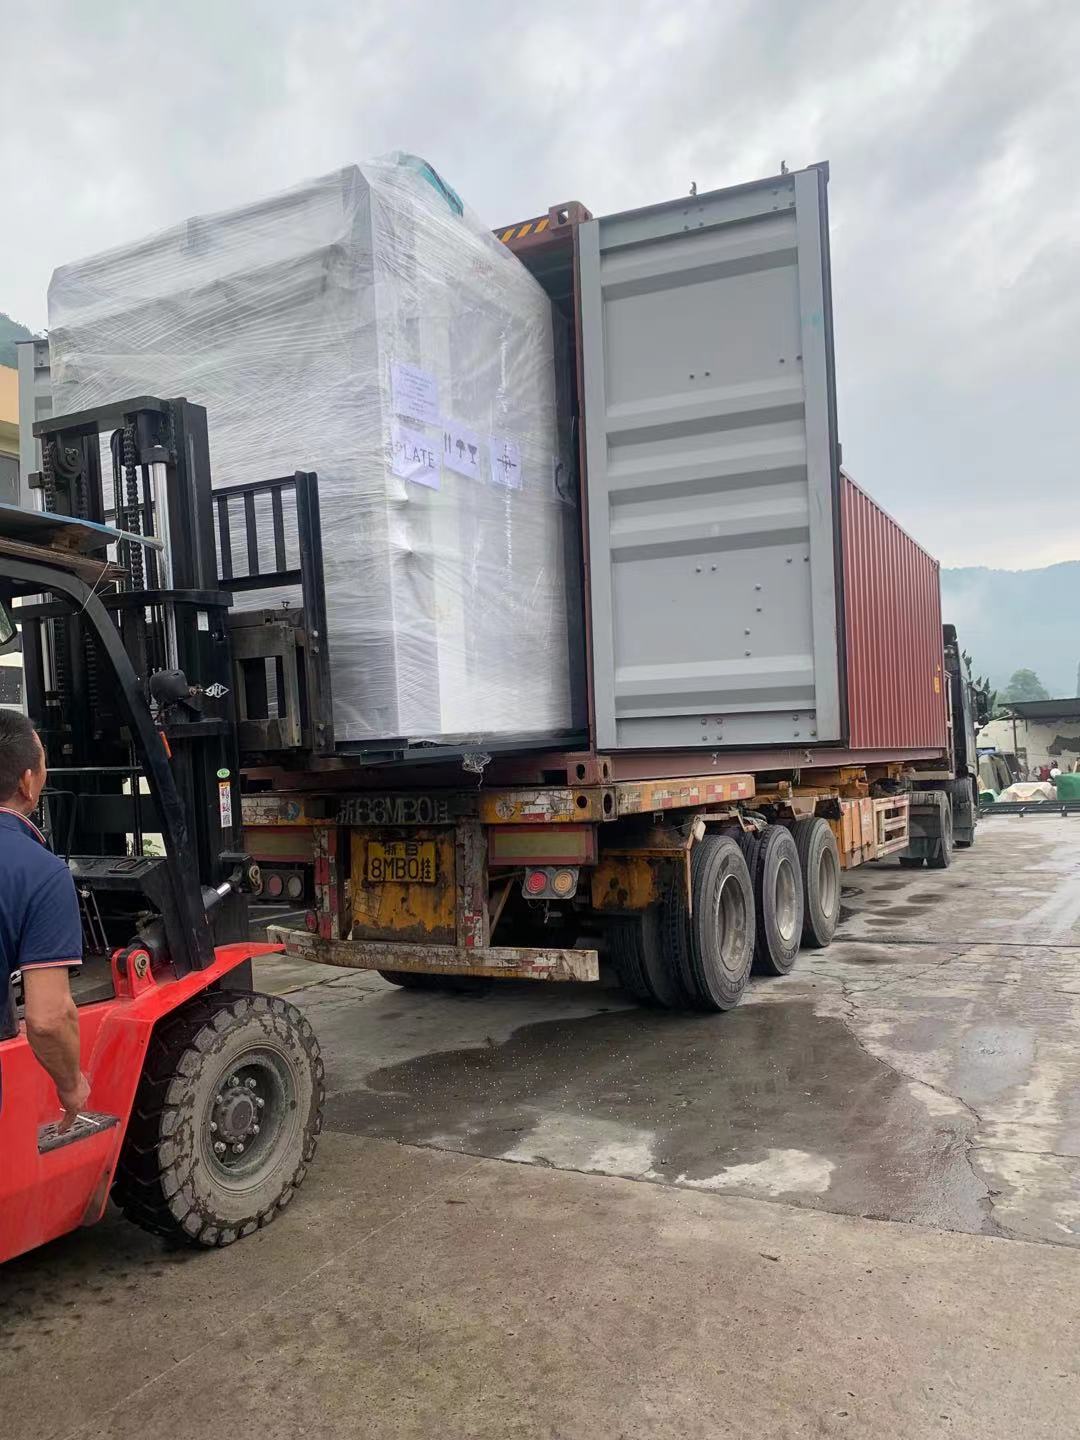 YOUBOND MACHINE Deliver to Greece